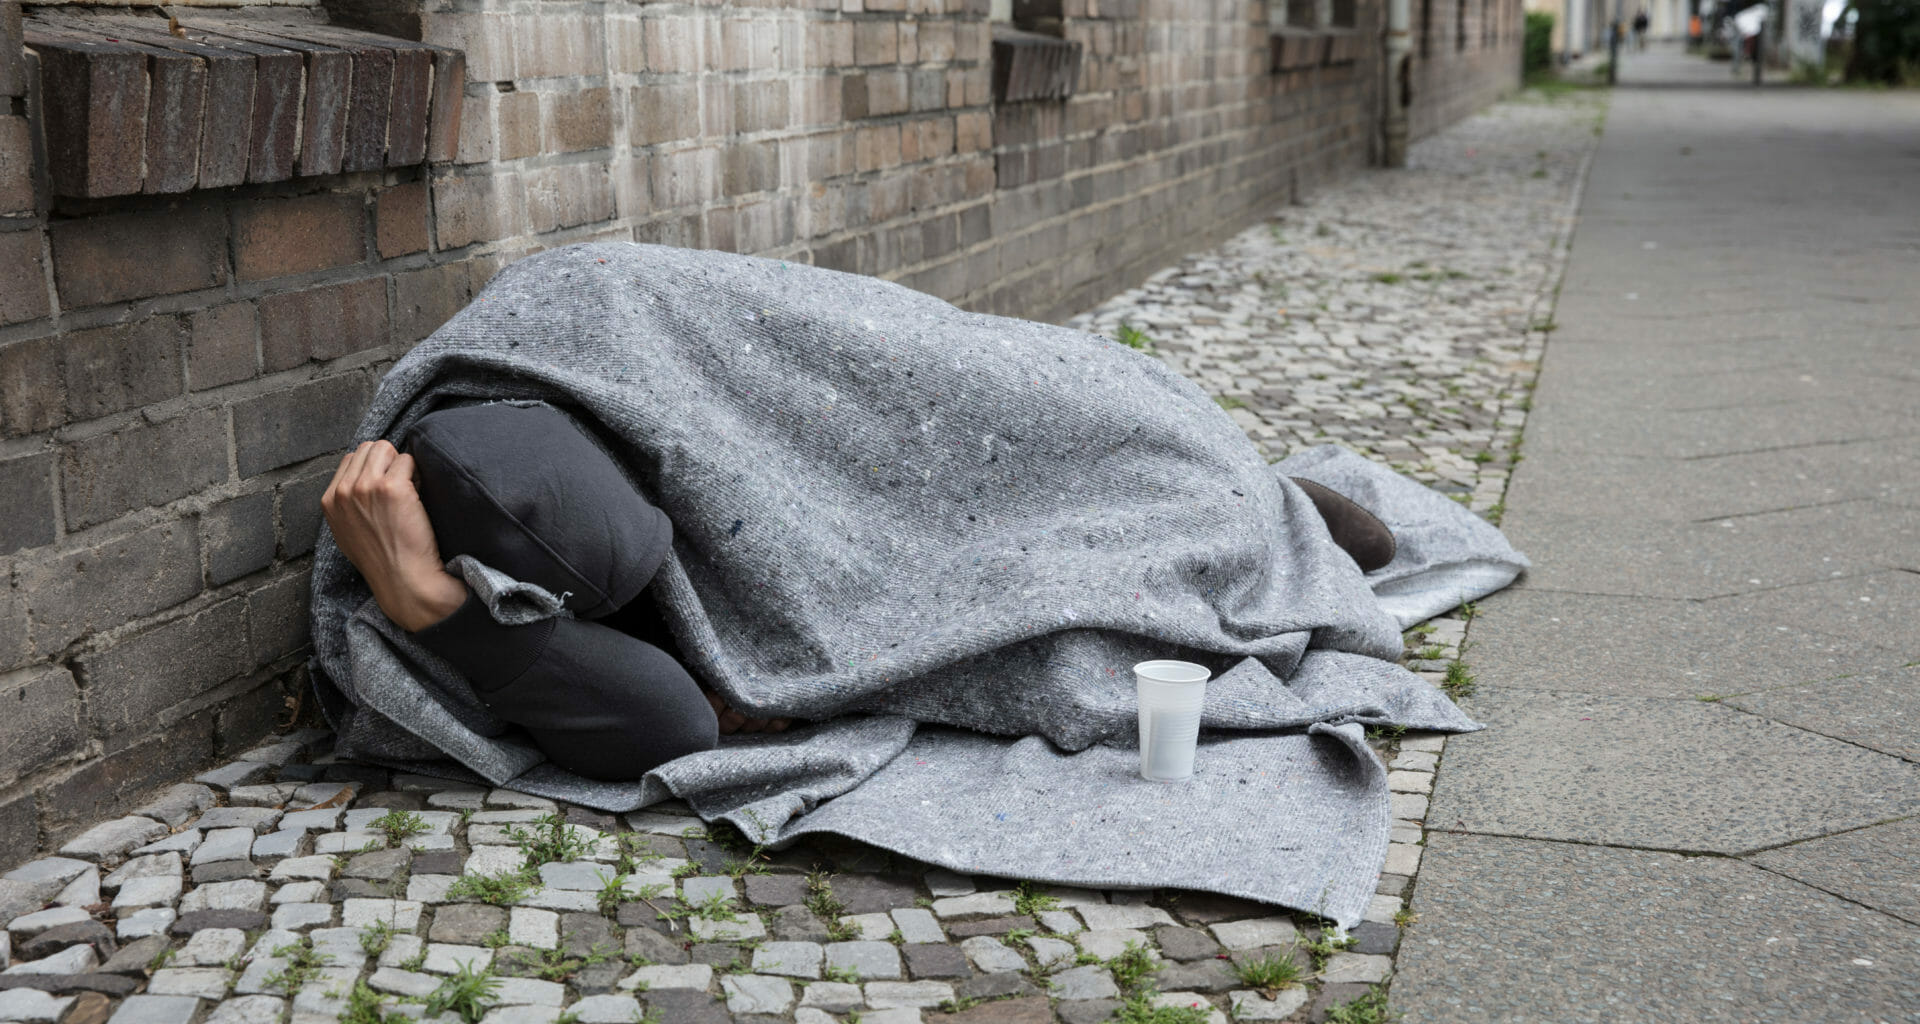 'Shocking' figures show half of record number of homeless deaths related to drugs 3